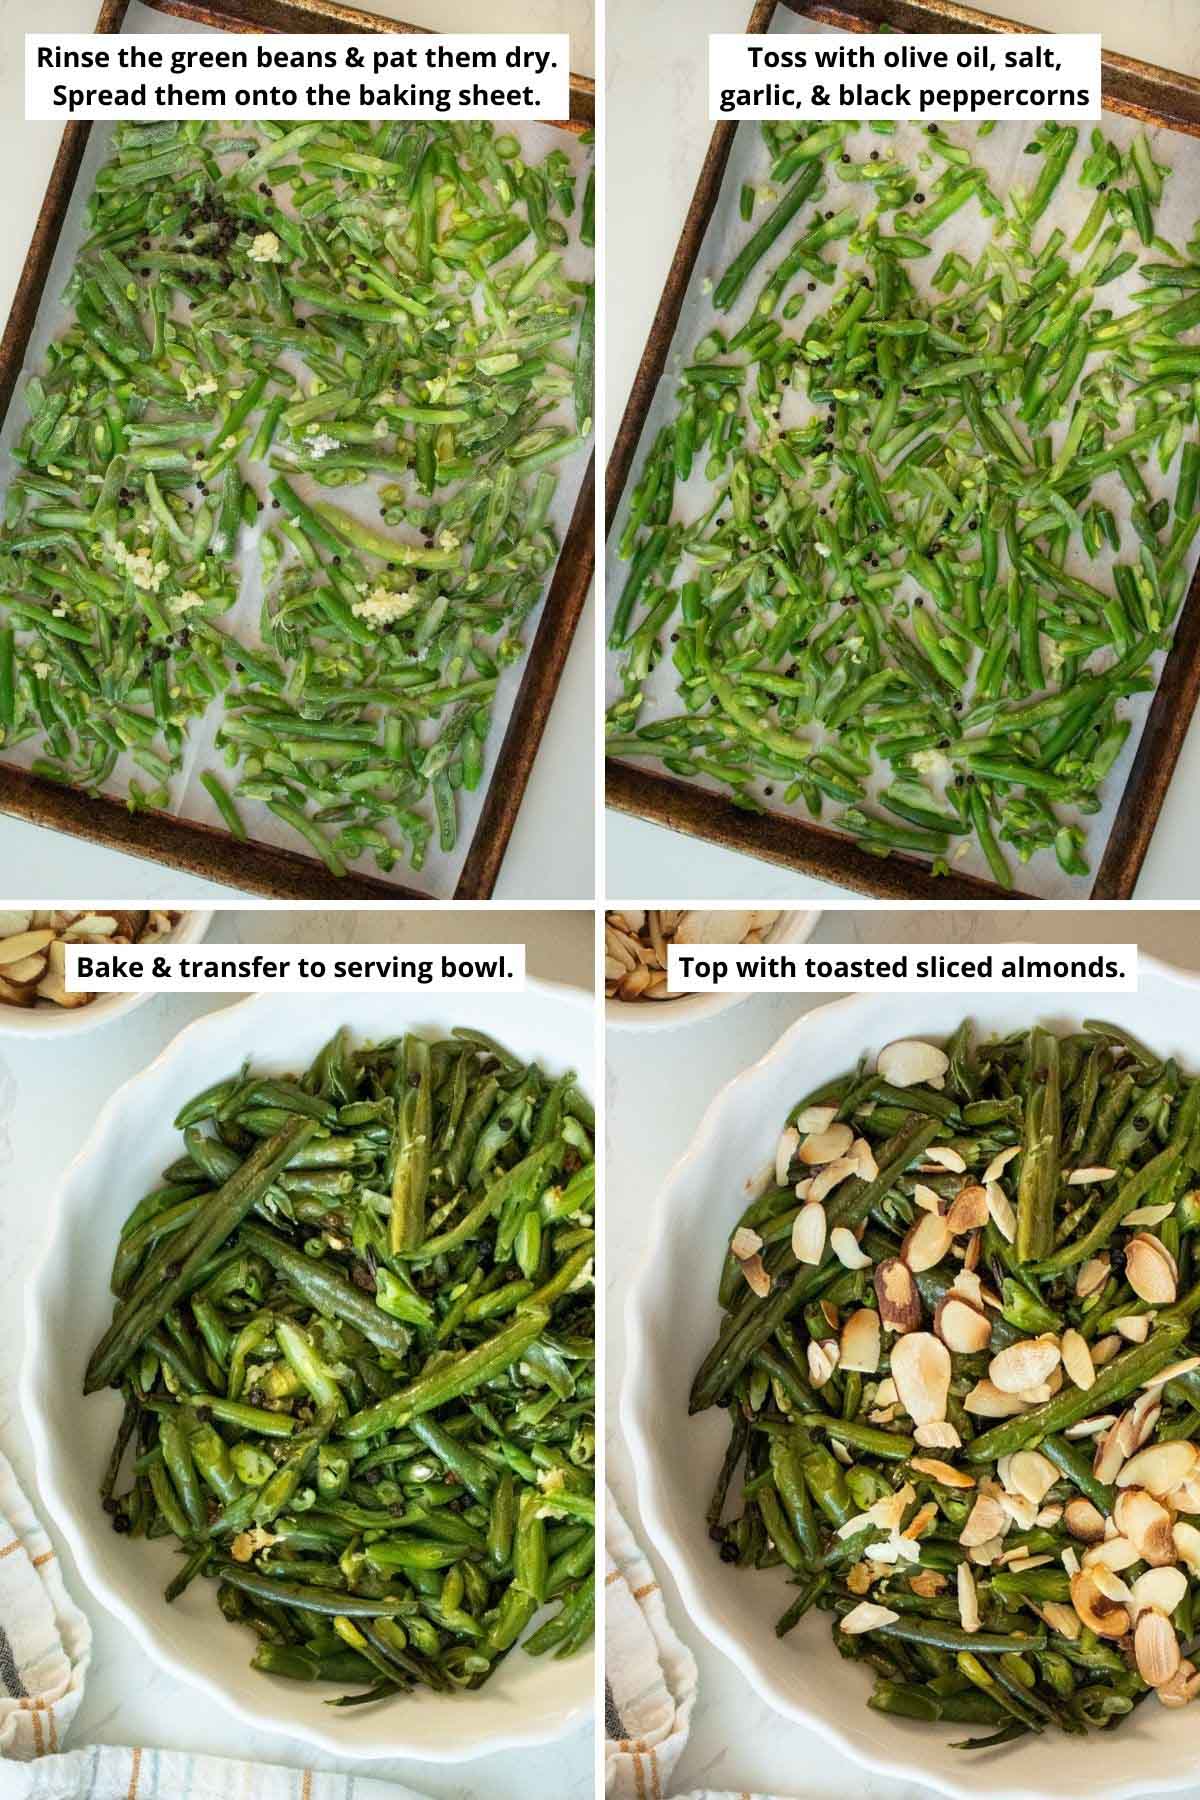 green beans and seasonings on the baking sheet before and after mixing, roasted frozen green beans in the serving bowl before and after topping with almonds